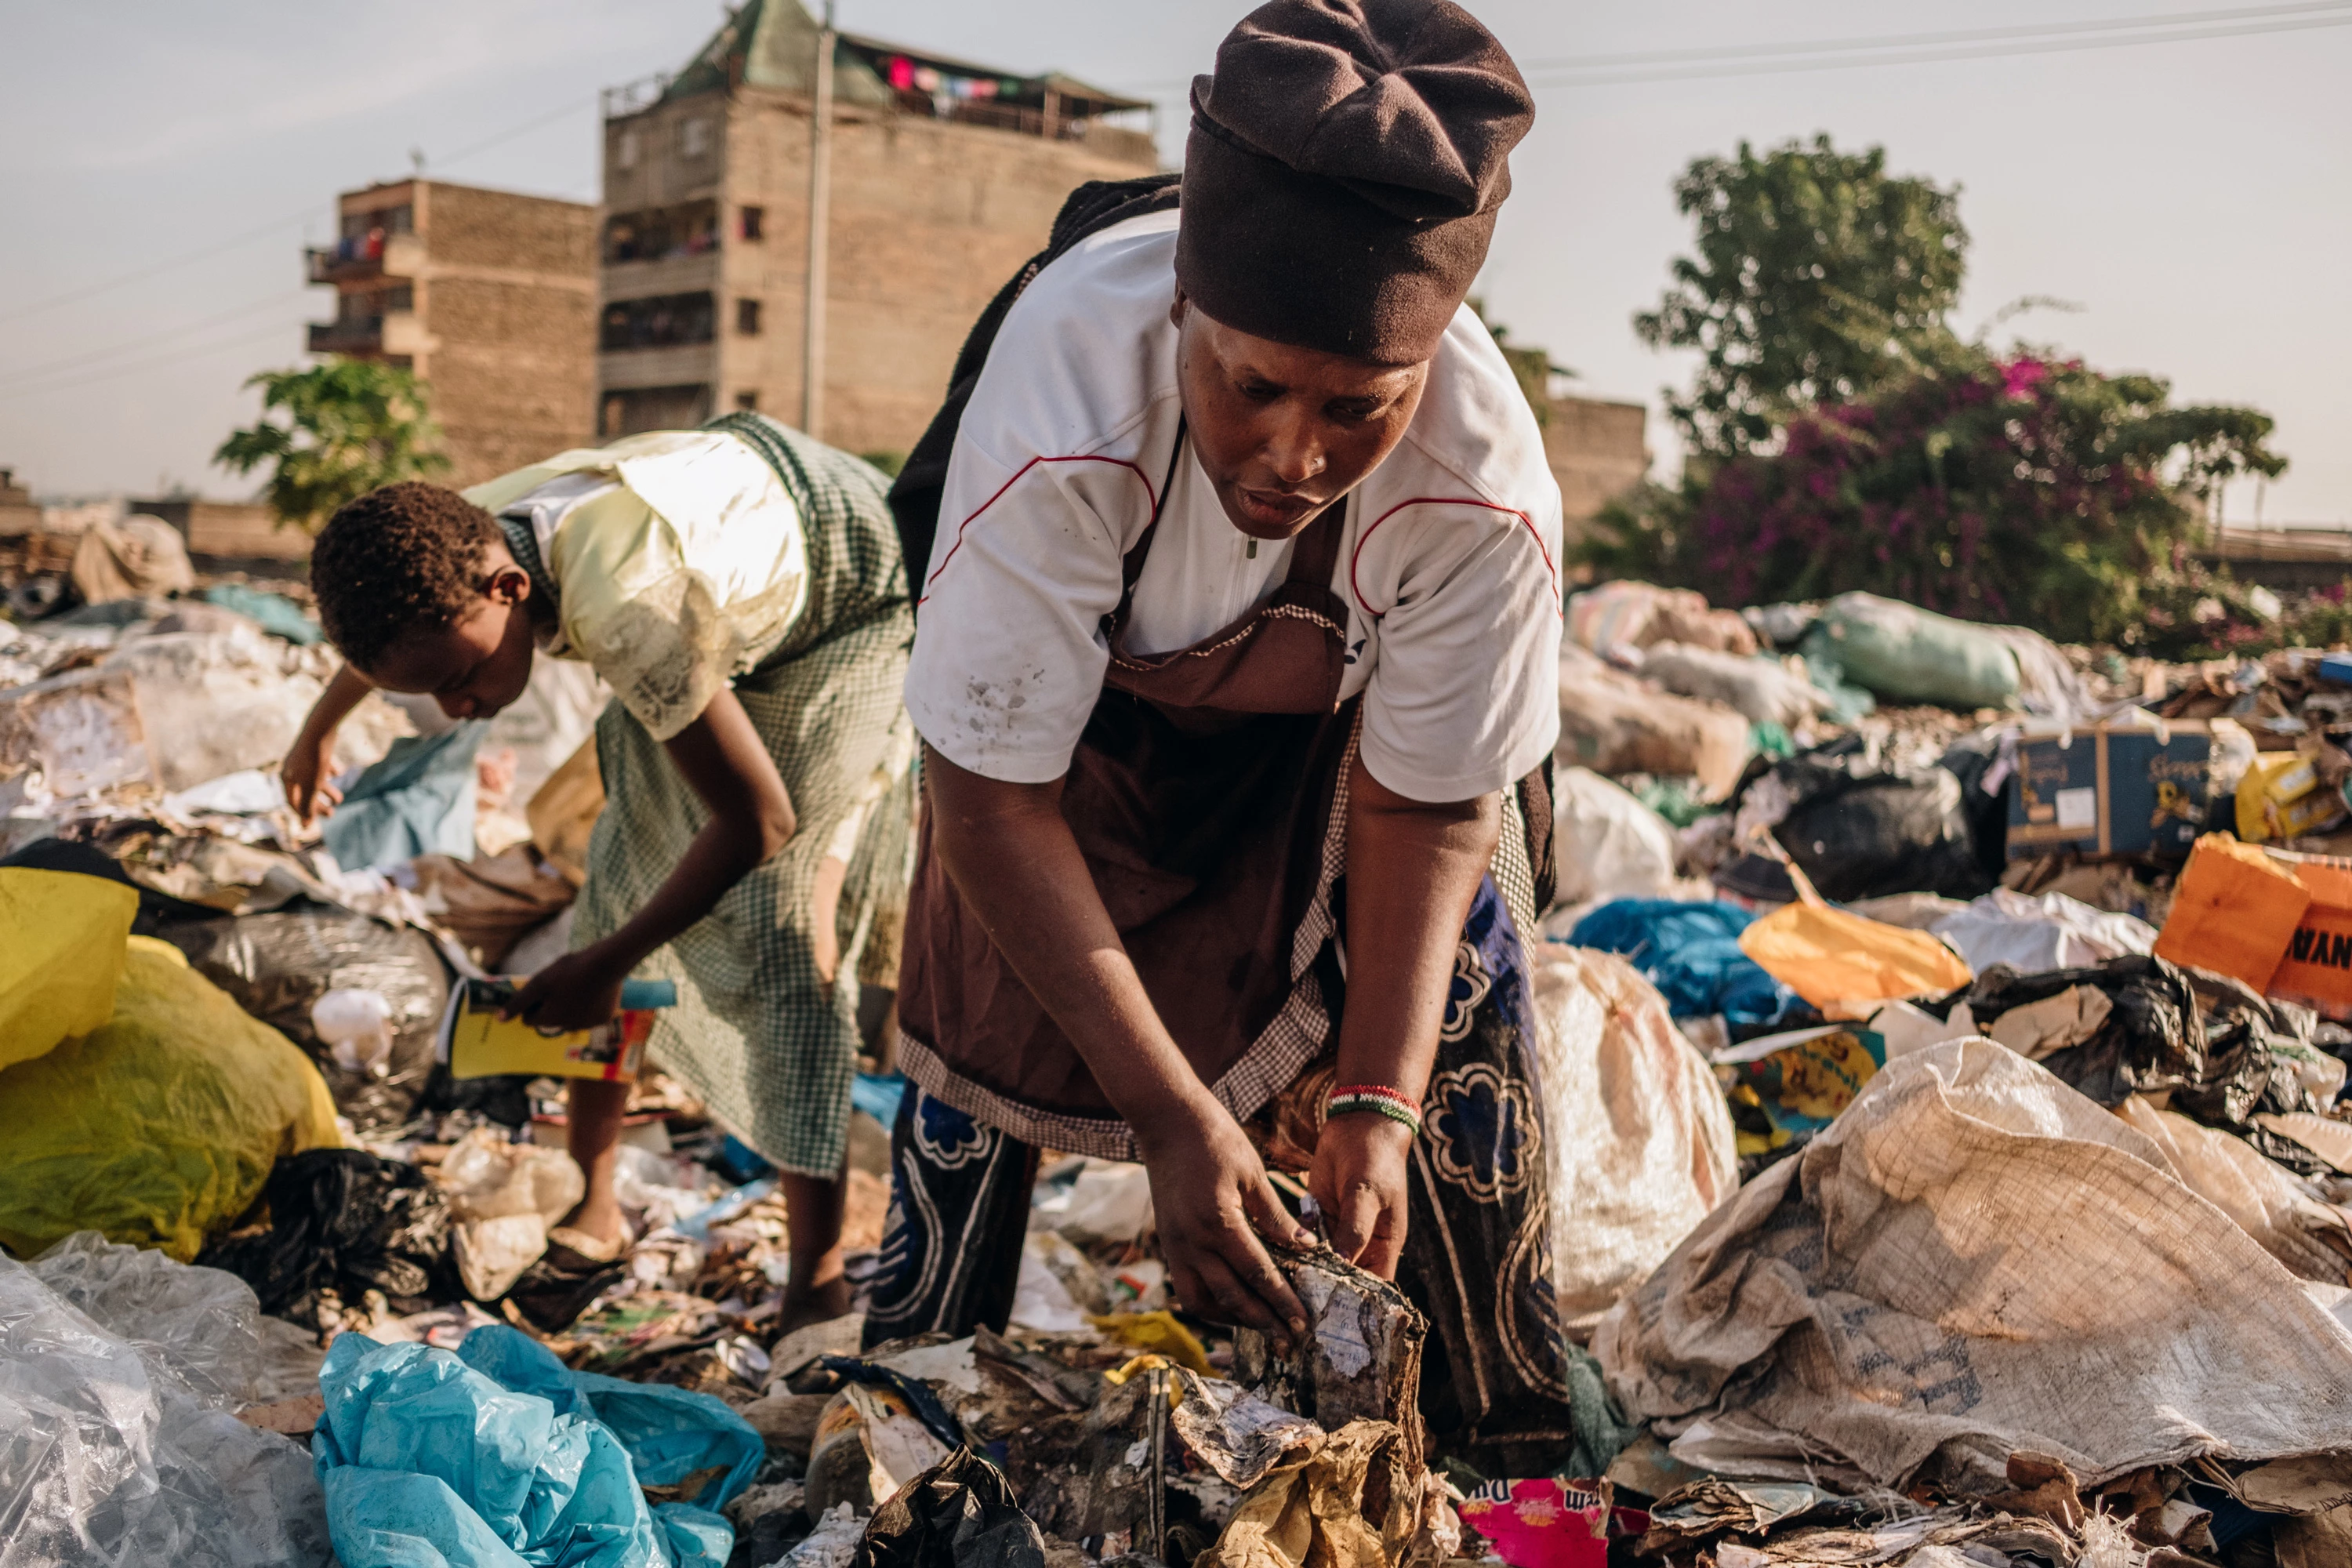 Miriam Nyambura and her 11-year-old niece, Rosemary, collect discarded cardboard boxes, paper, and plastic bottles at the Dandora dump on Feb. 29, 2020. Miriam picks an average of 20kgs of waste each day.